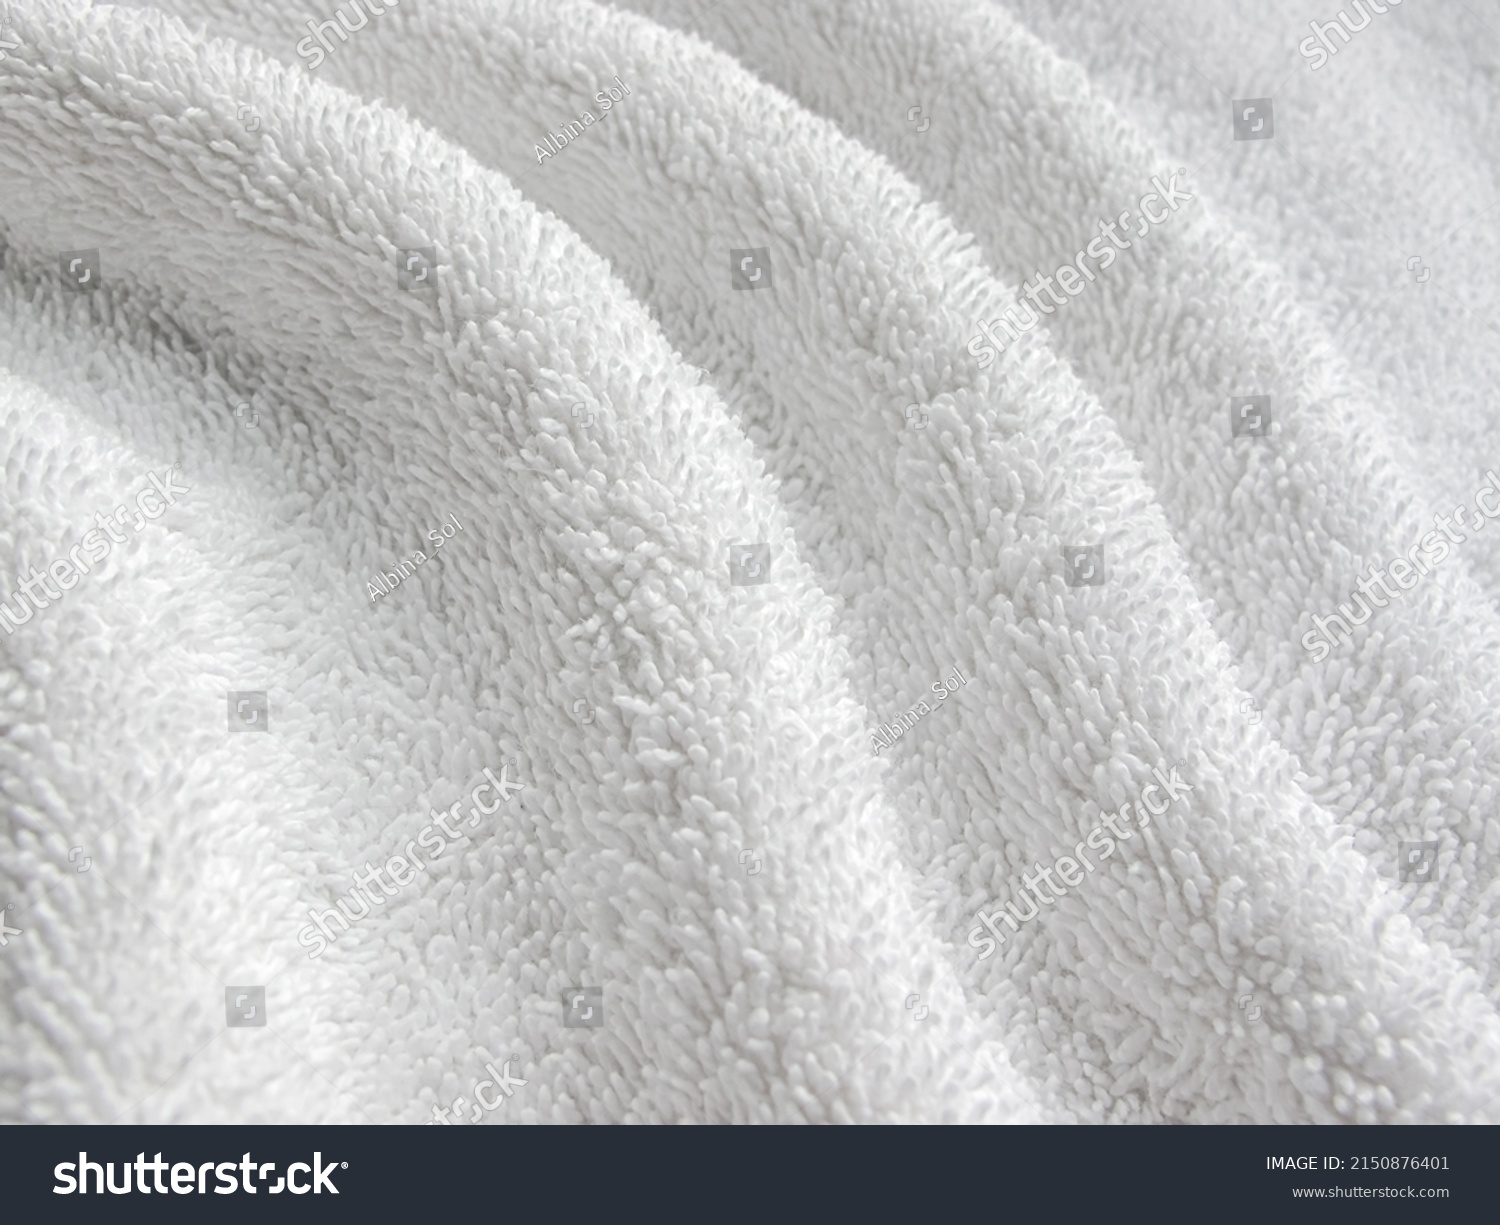 White background of towel texture. White towel lies in twisted beautiful folds. Macro photo of terry cloth or beach towel. Soft textile background. #2150876401